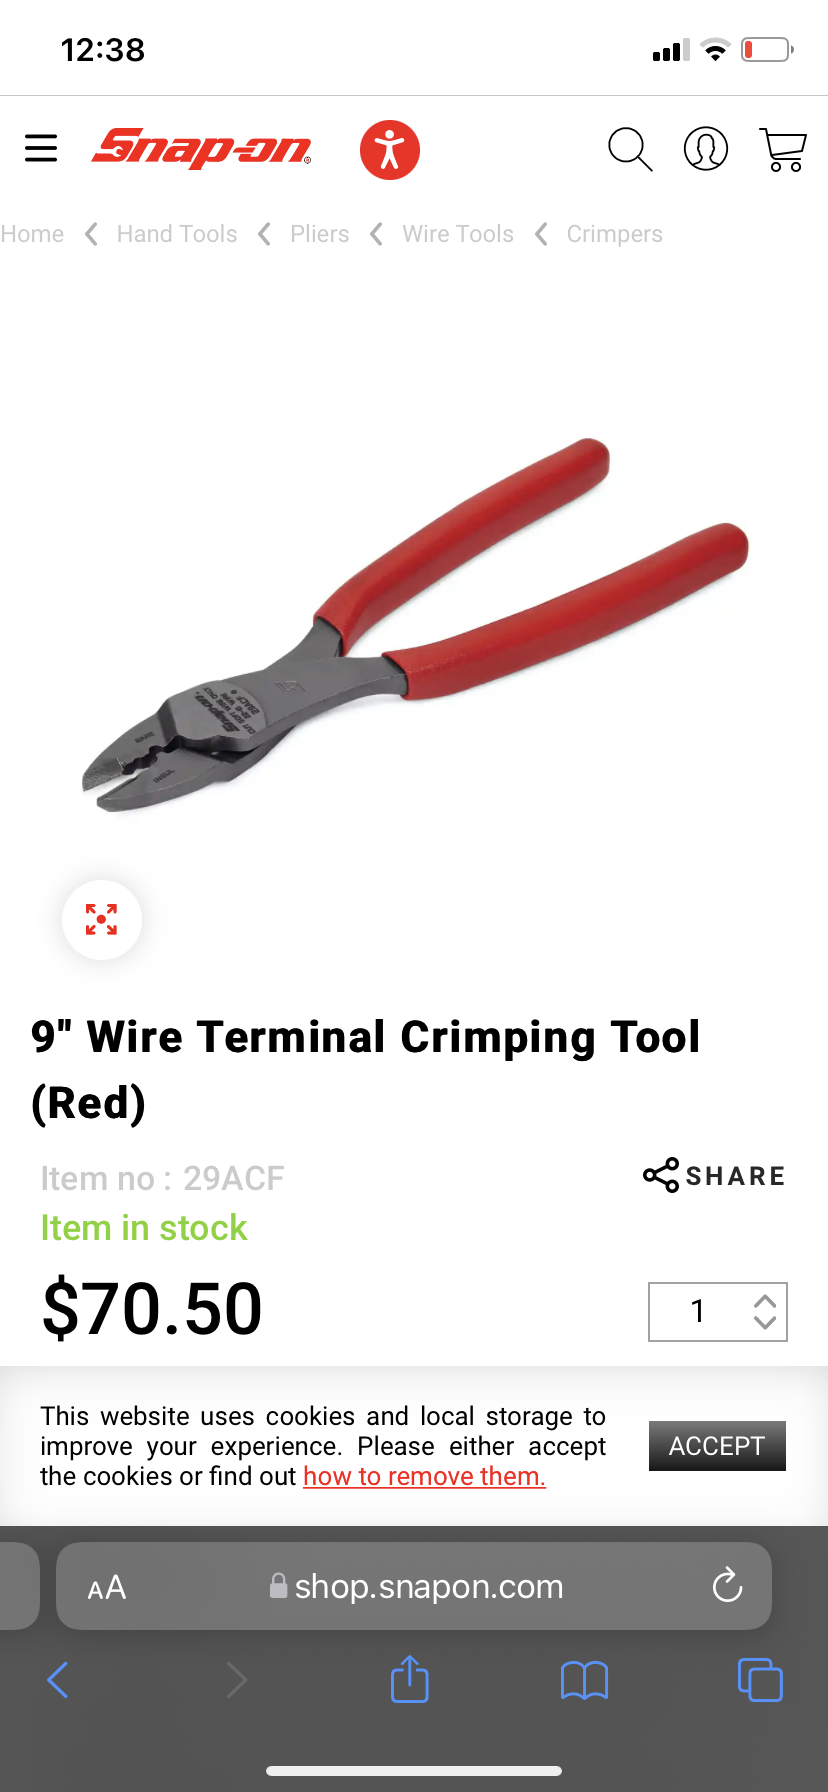 Crimp tool - The Hull Truth - Boating and Fishing Forum